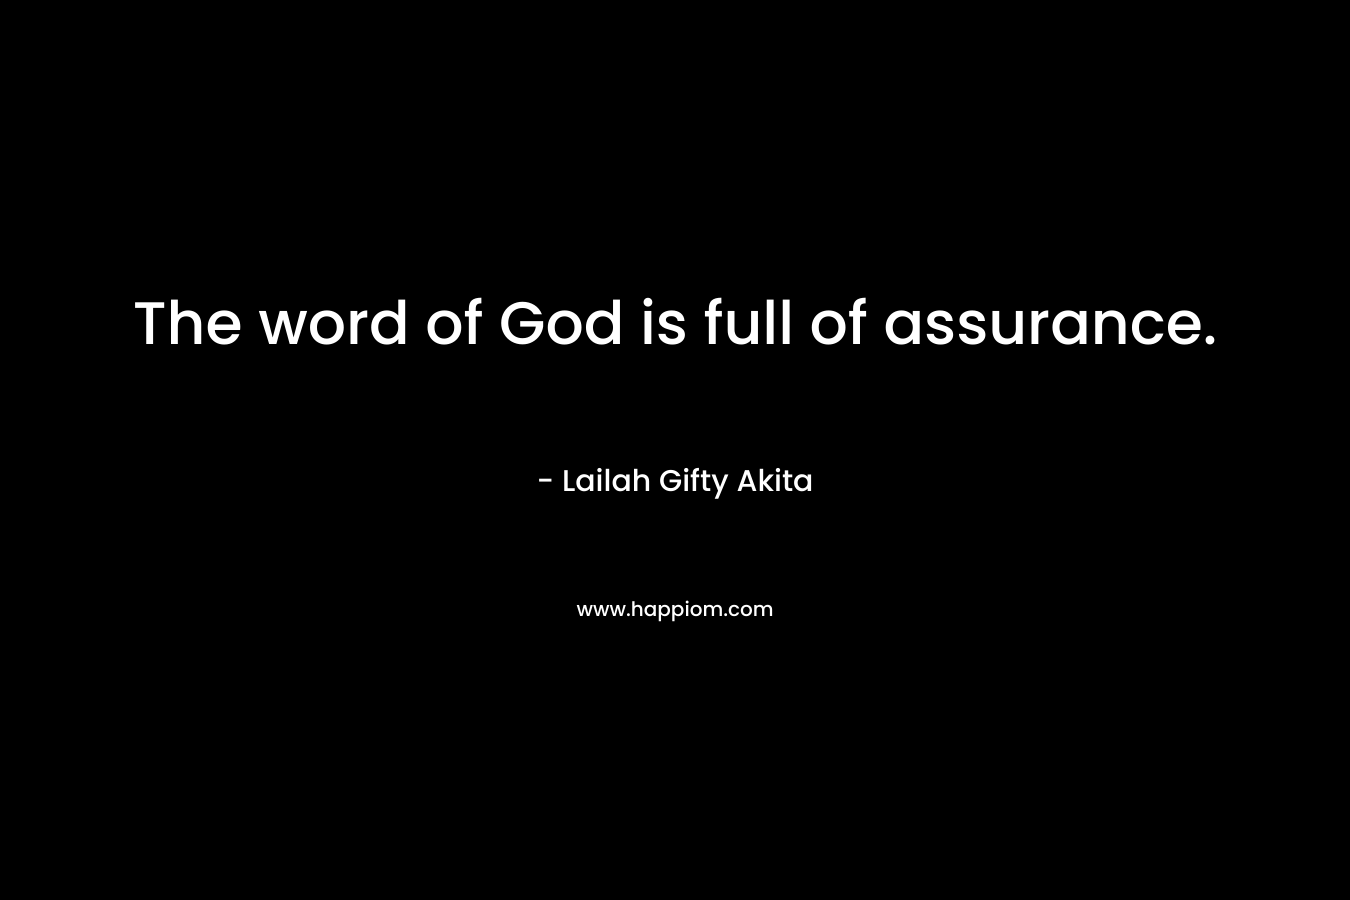 The word of God is full of assurance.